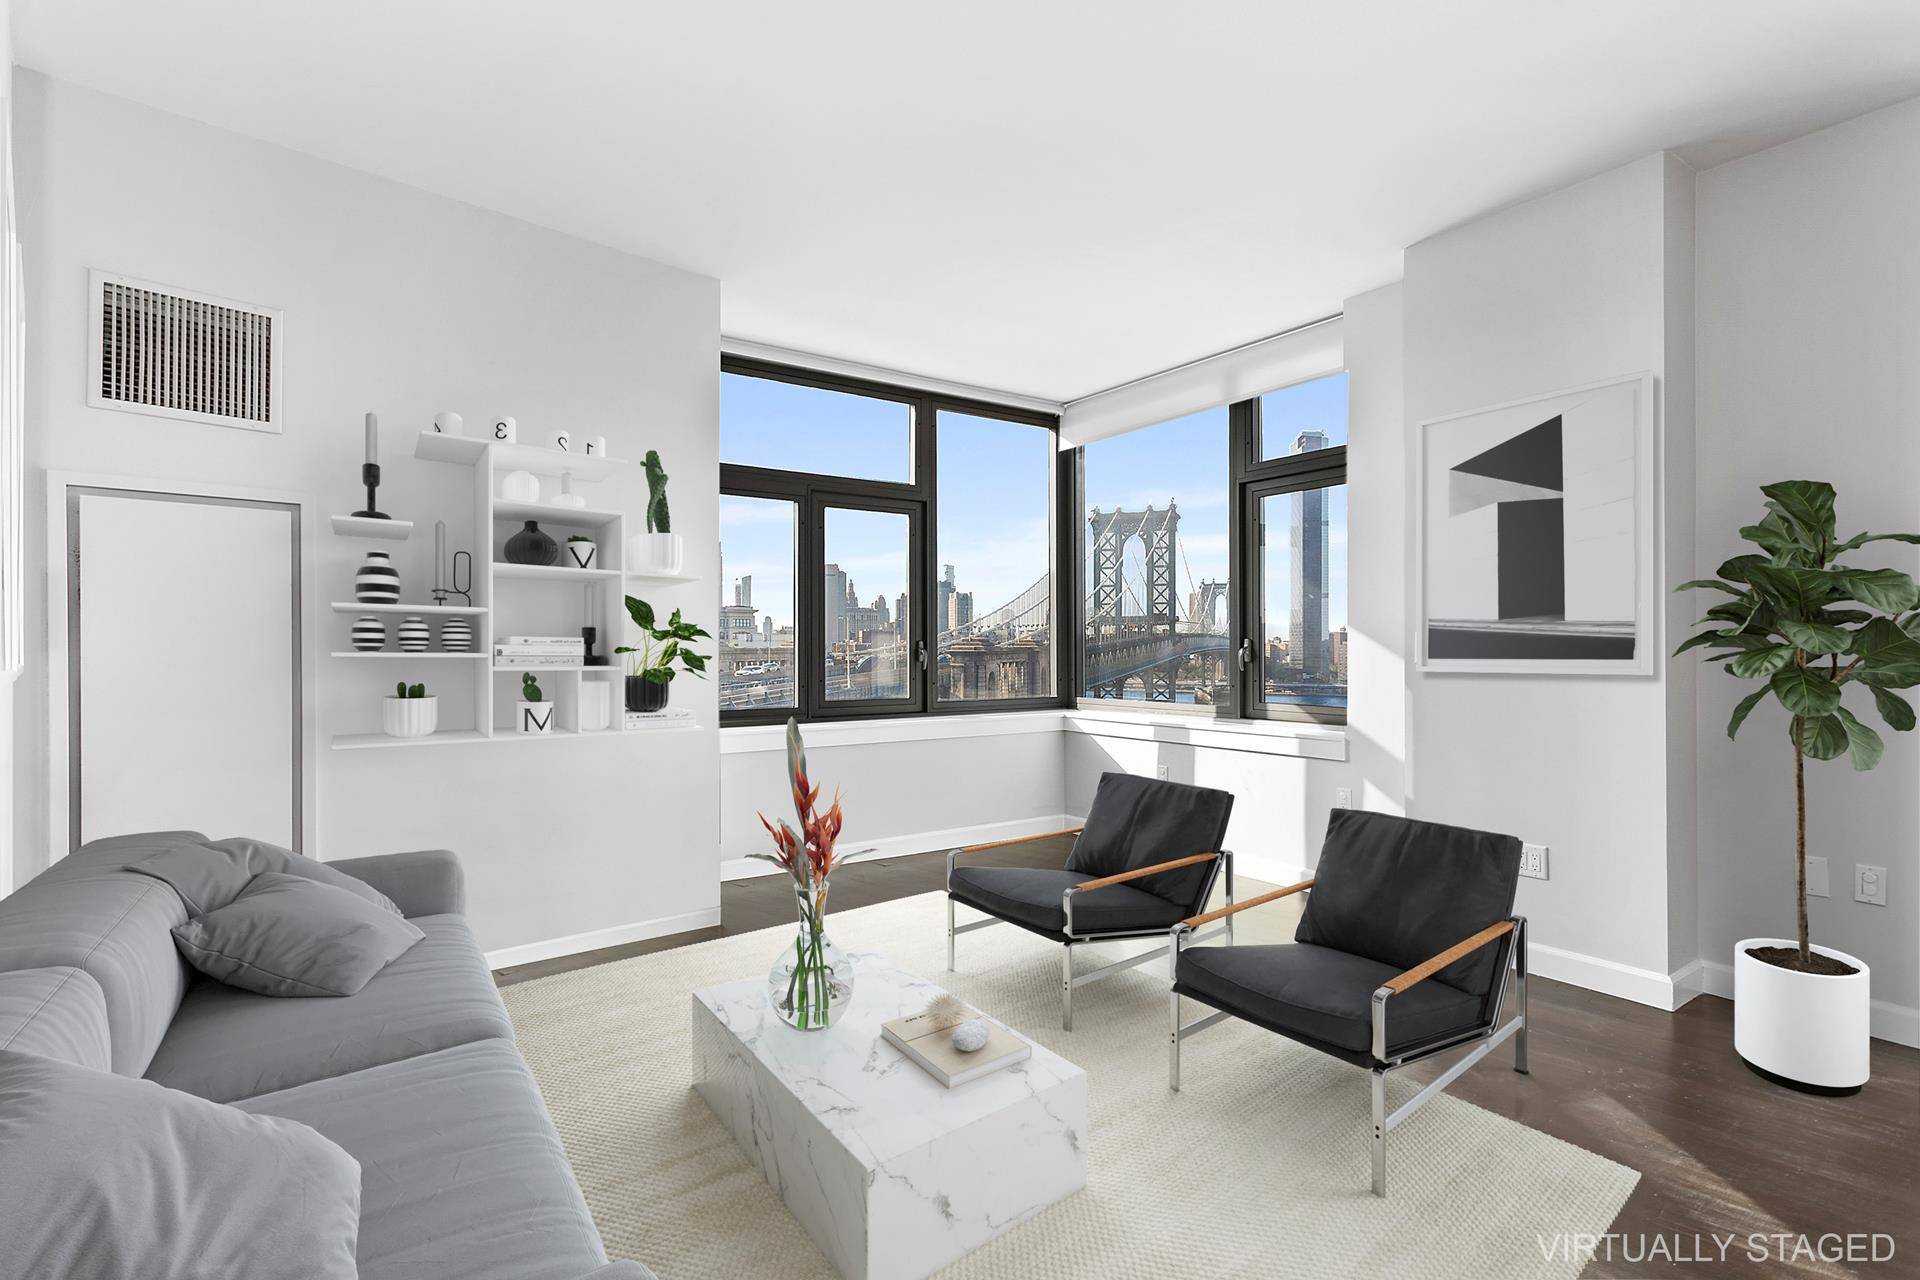 This exceptional 1223 square foot A line with striking views facing Manhattan is an extraordinary residence.